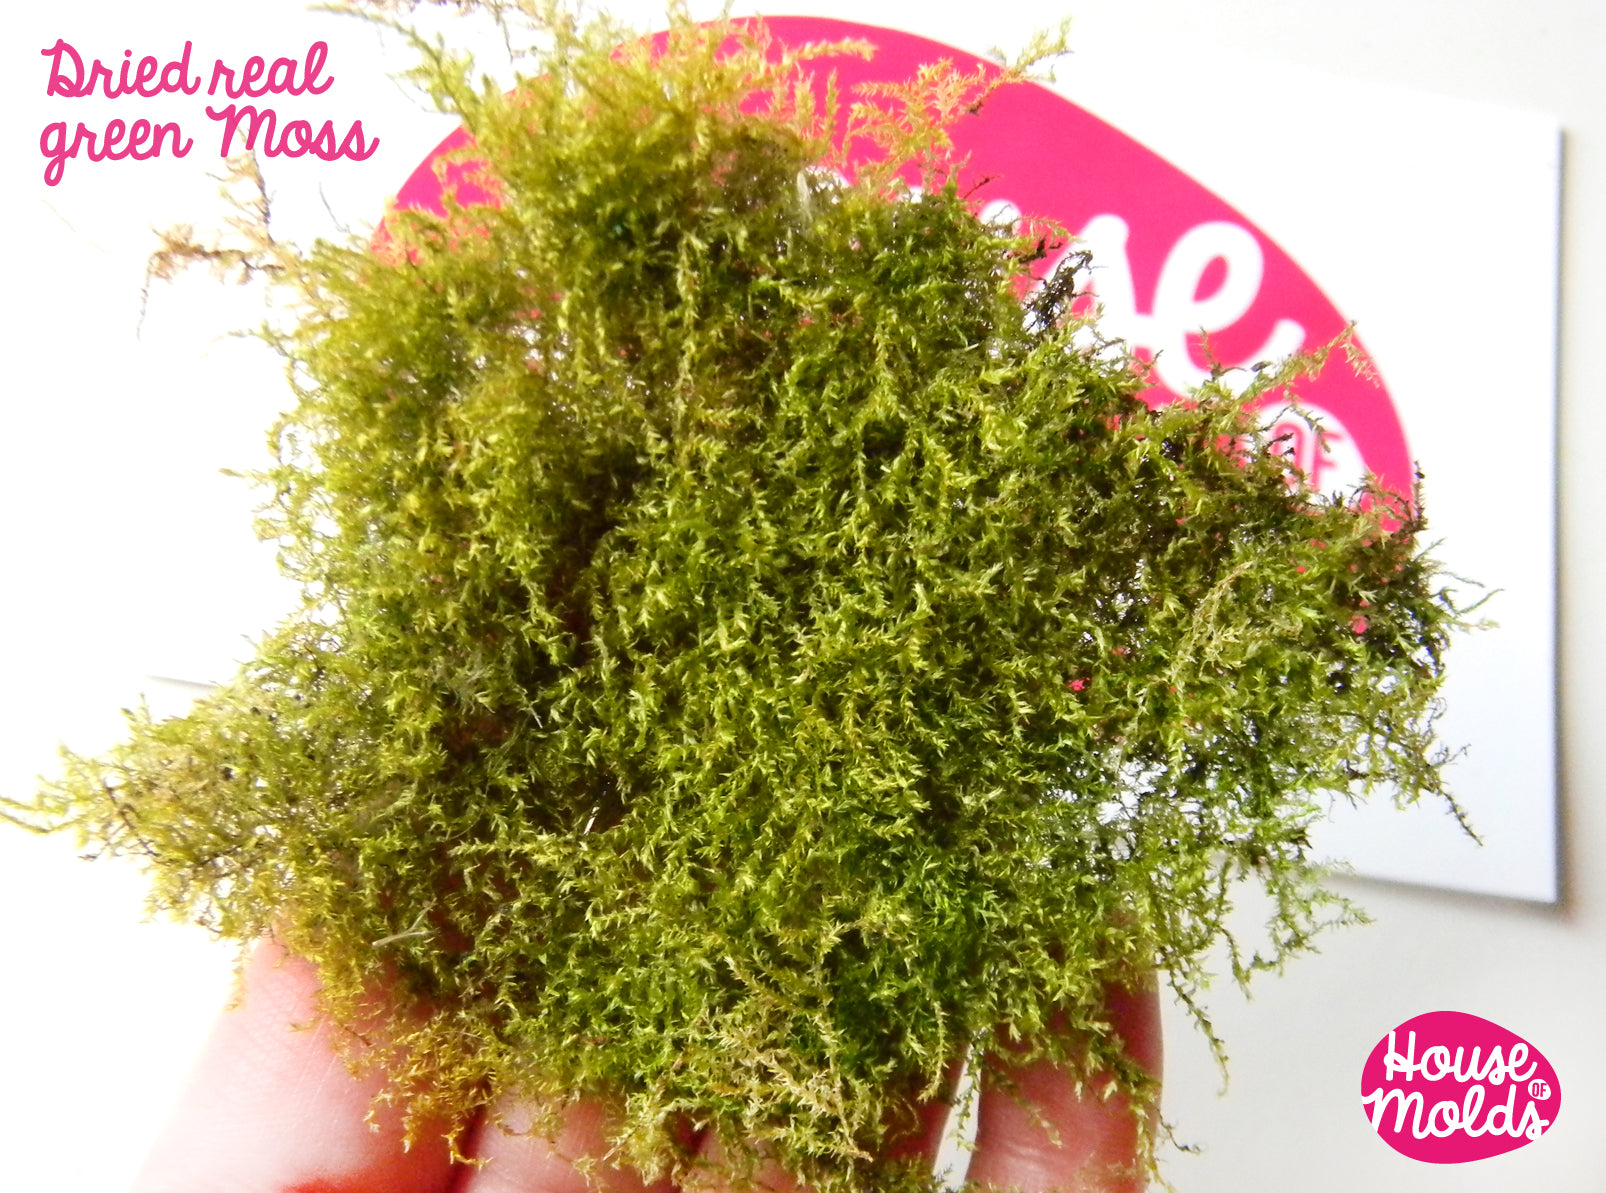 Dryed Natural Green Moss,ideal for any type of resin inclusions